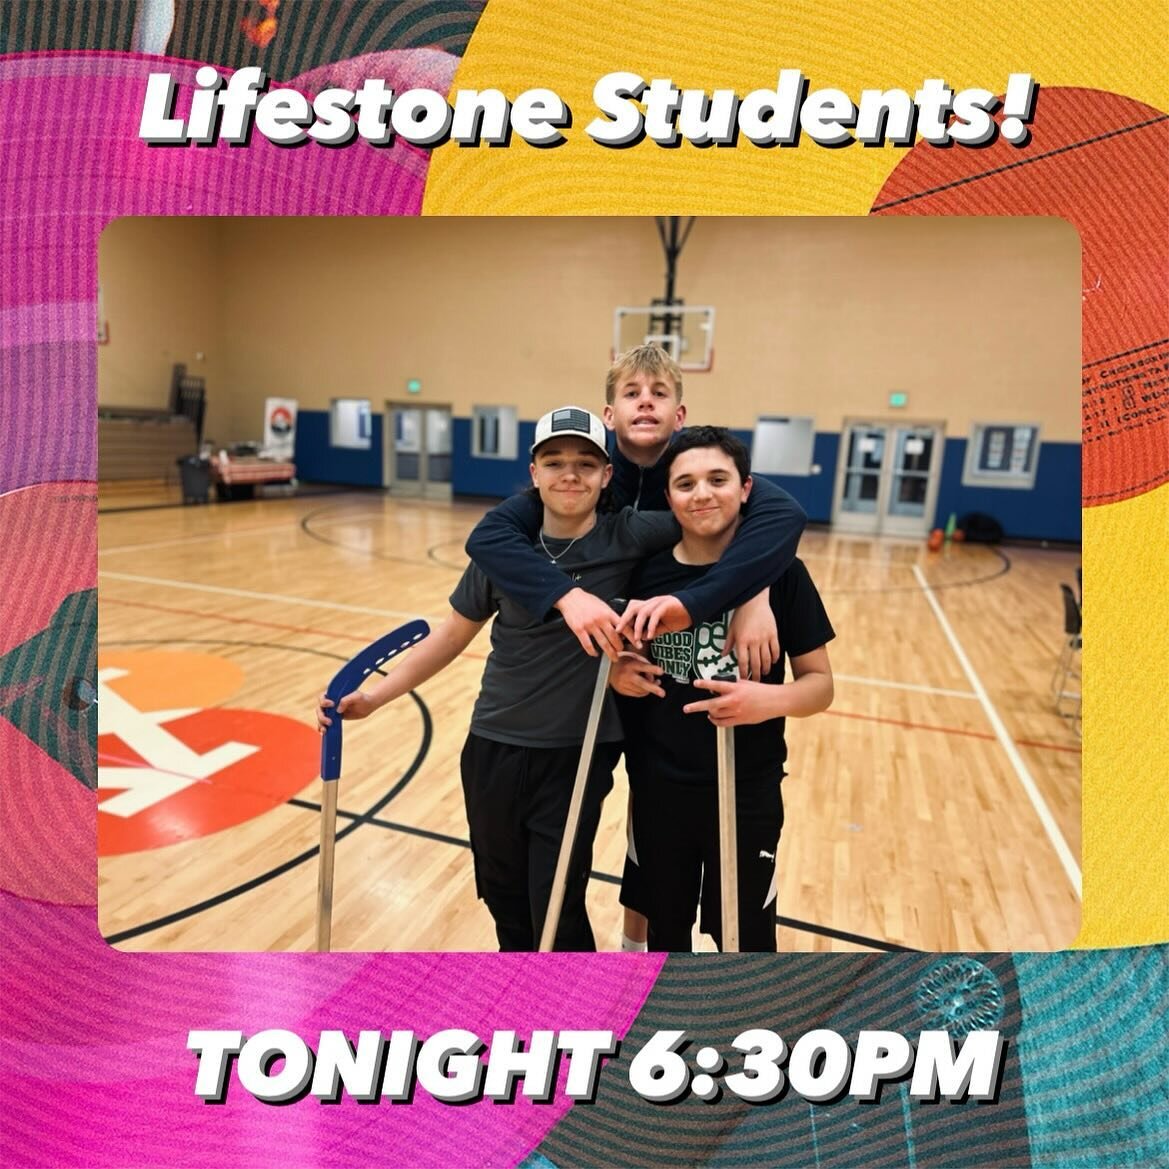 👋 Lifestone Students... Come hang out with us TONIGHT @ 6:30pm! We&rsquo;ll have PIZZA, games and continue our series, Rhythm. Bring a friend and see you there!

#studentlife #lifestonestudents #rhythm #Jesus